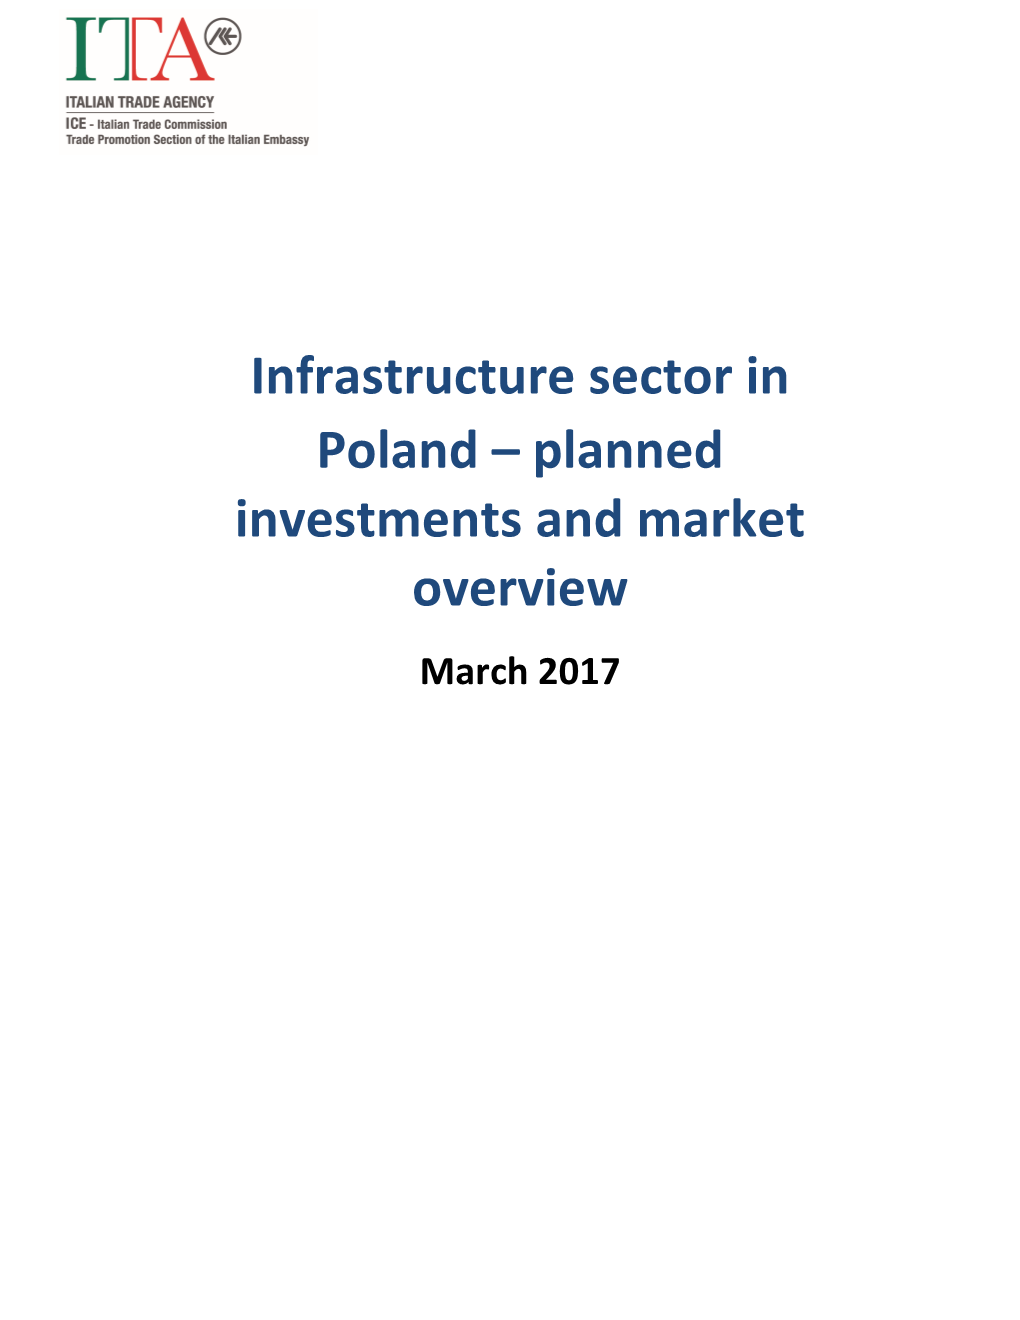 Infrastructure Sector in Poland – Planned Investments and Market